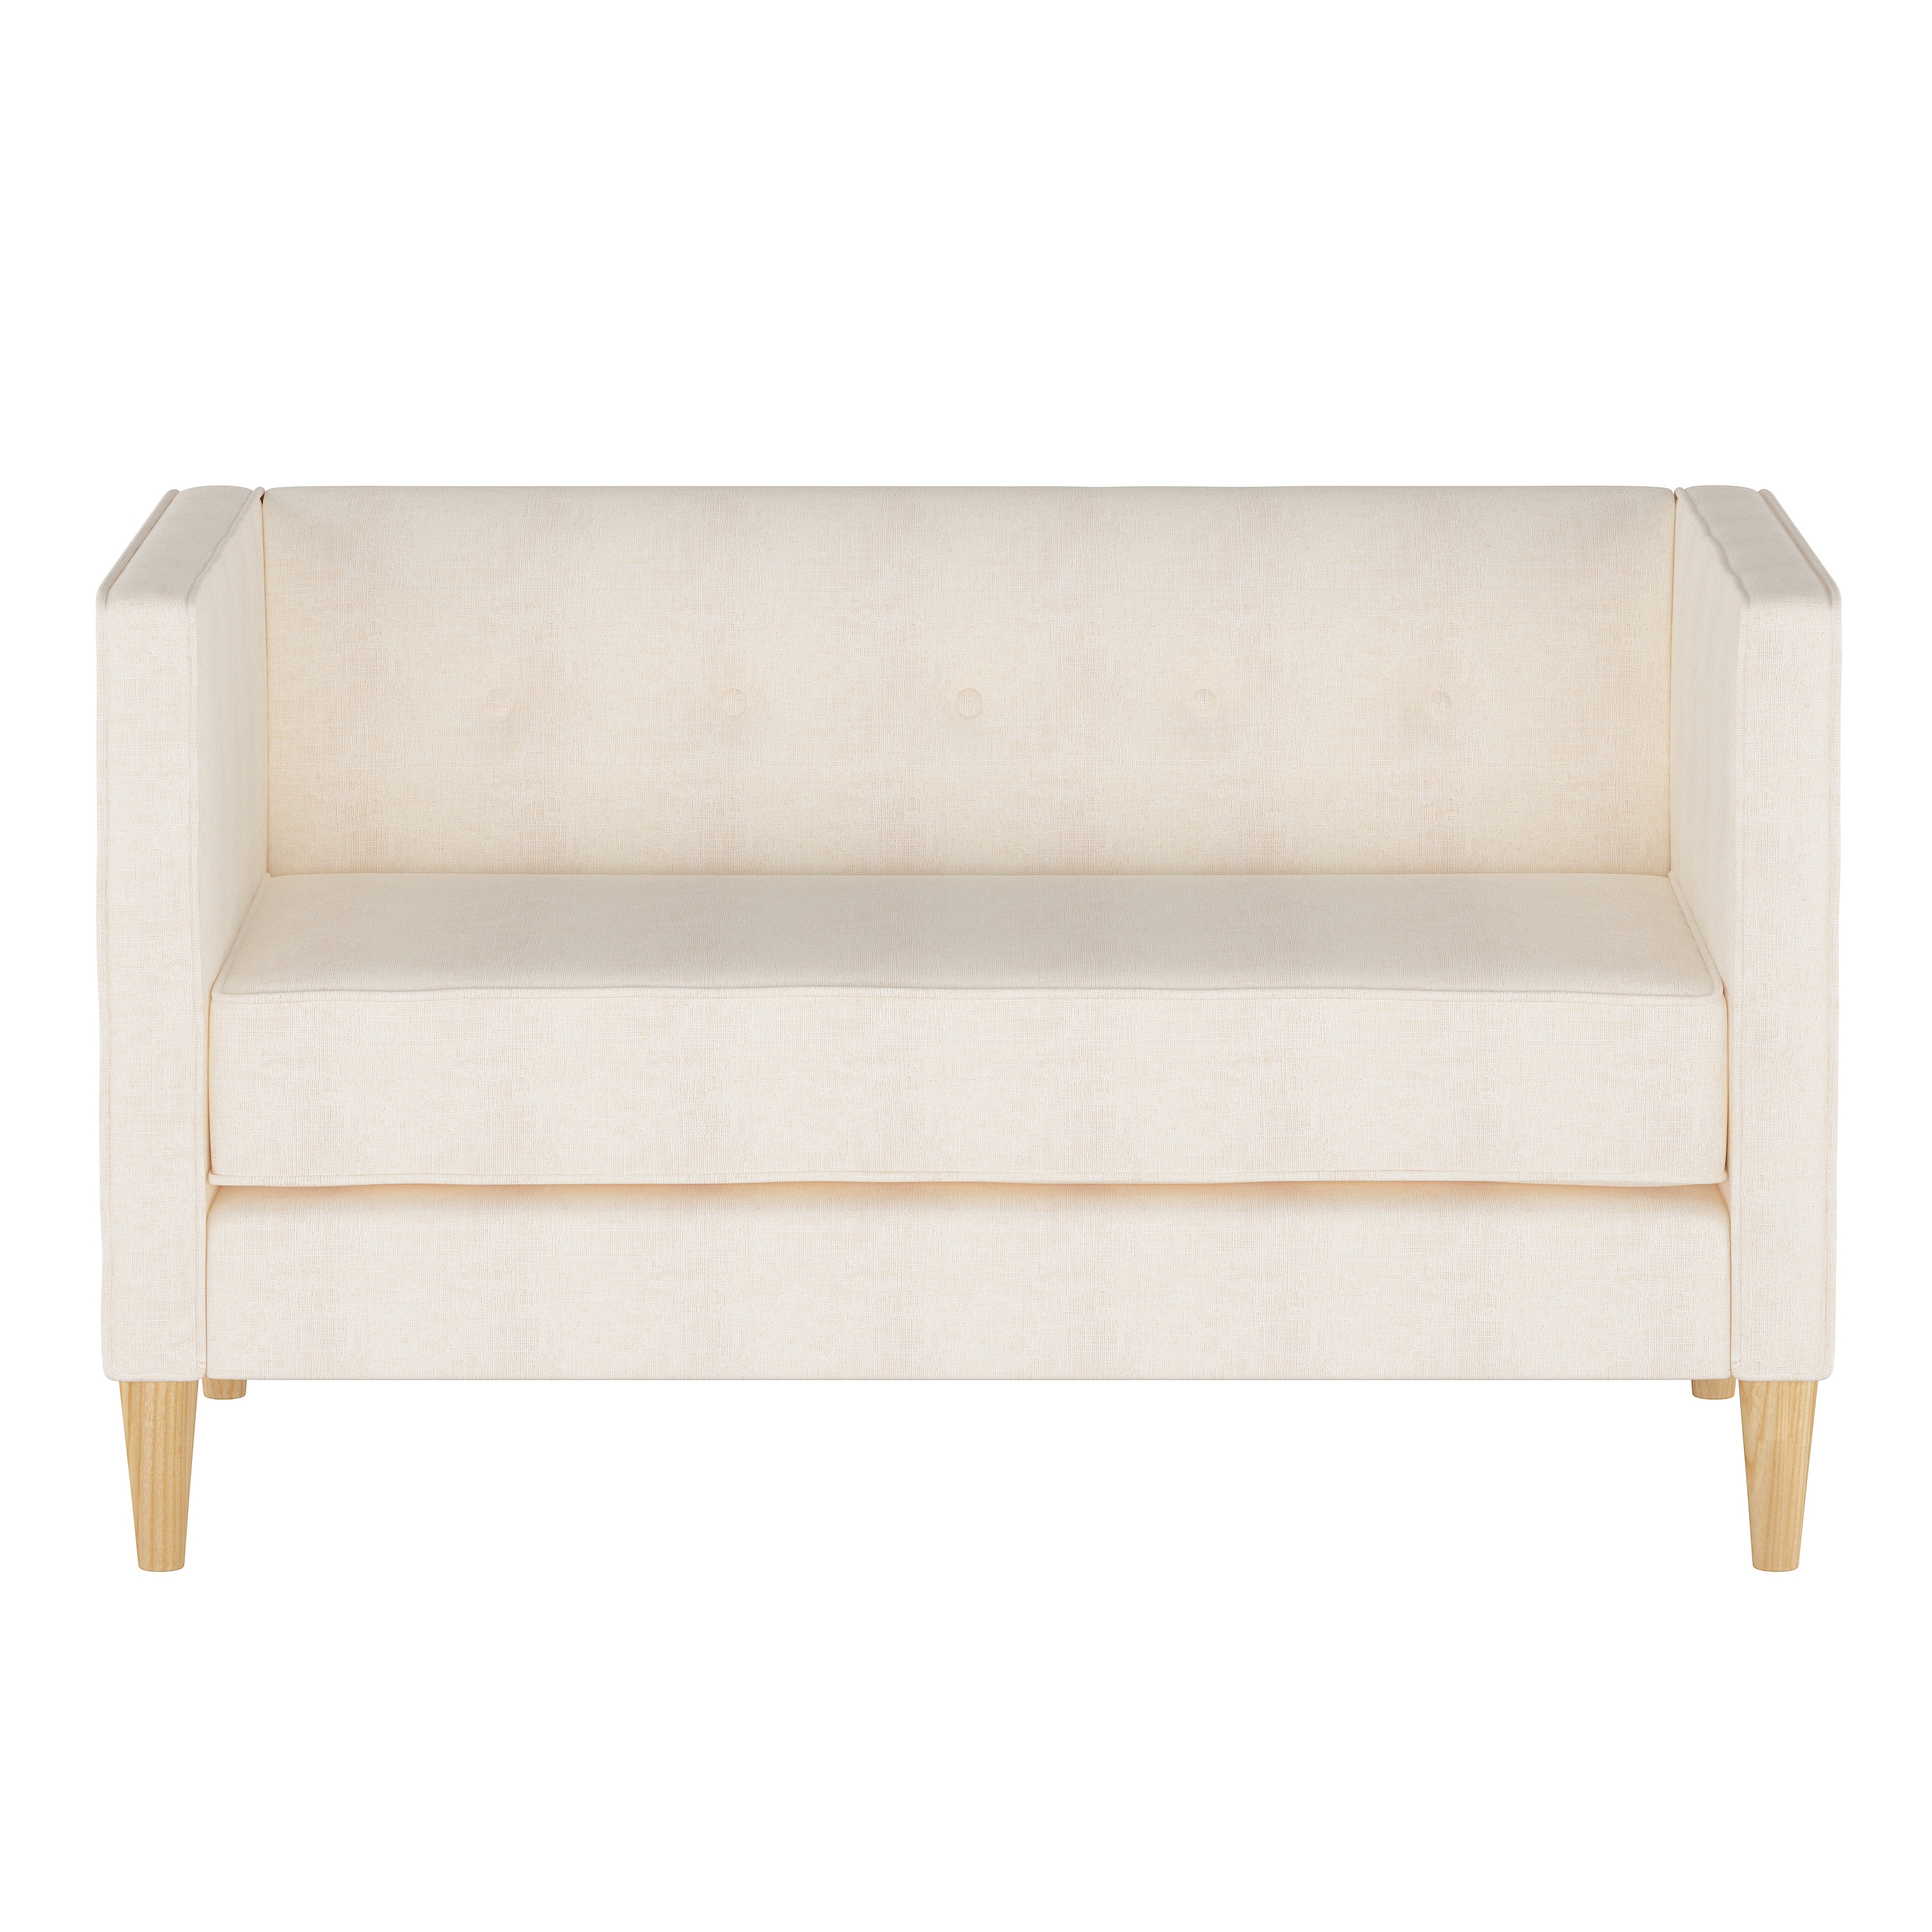 Downing Settee, White - DNU - Image 1